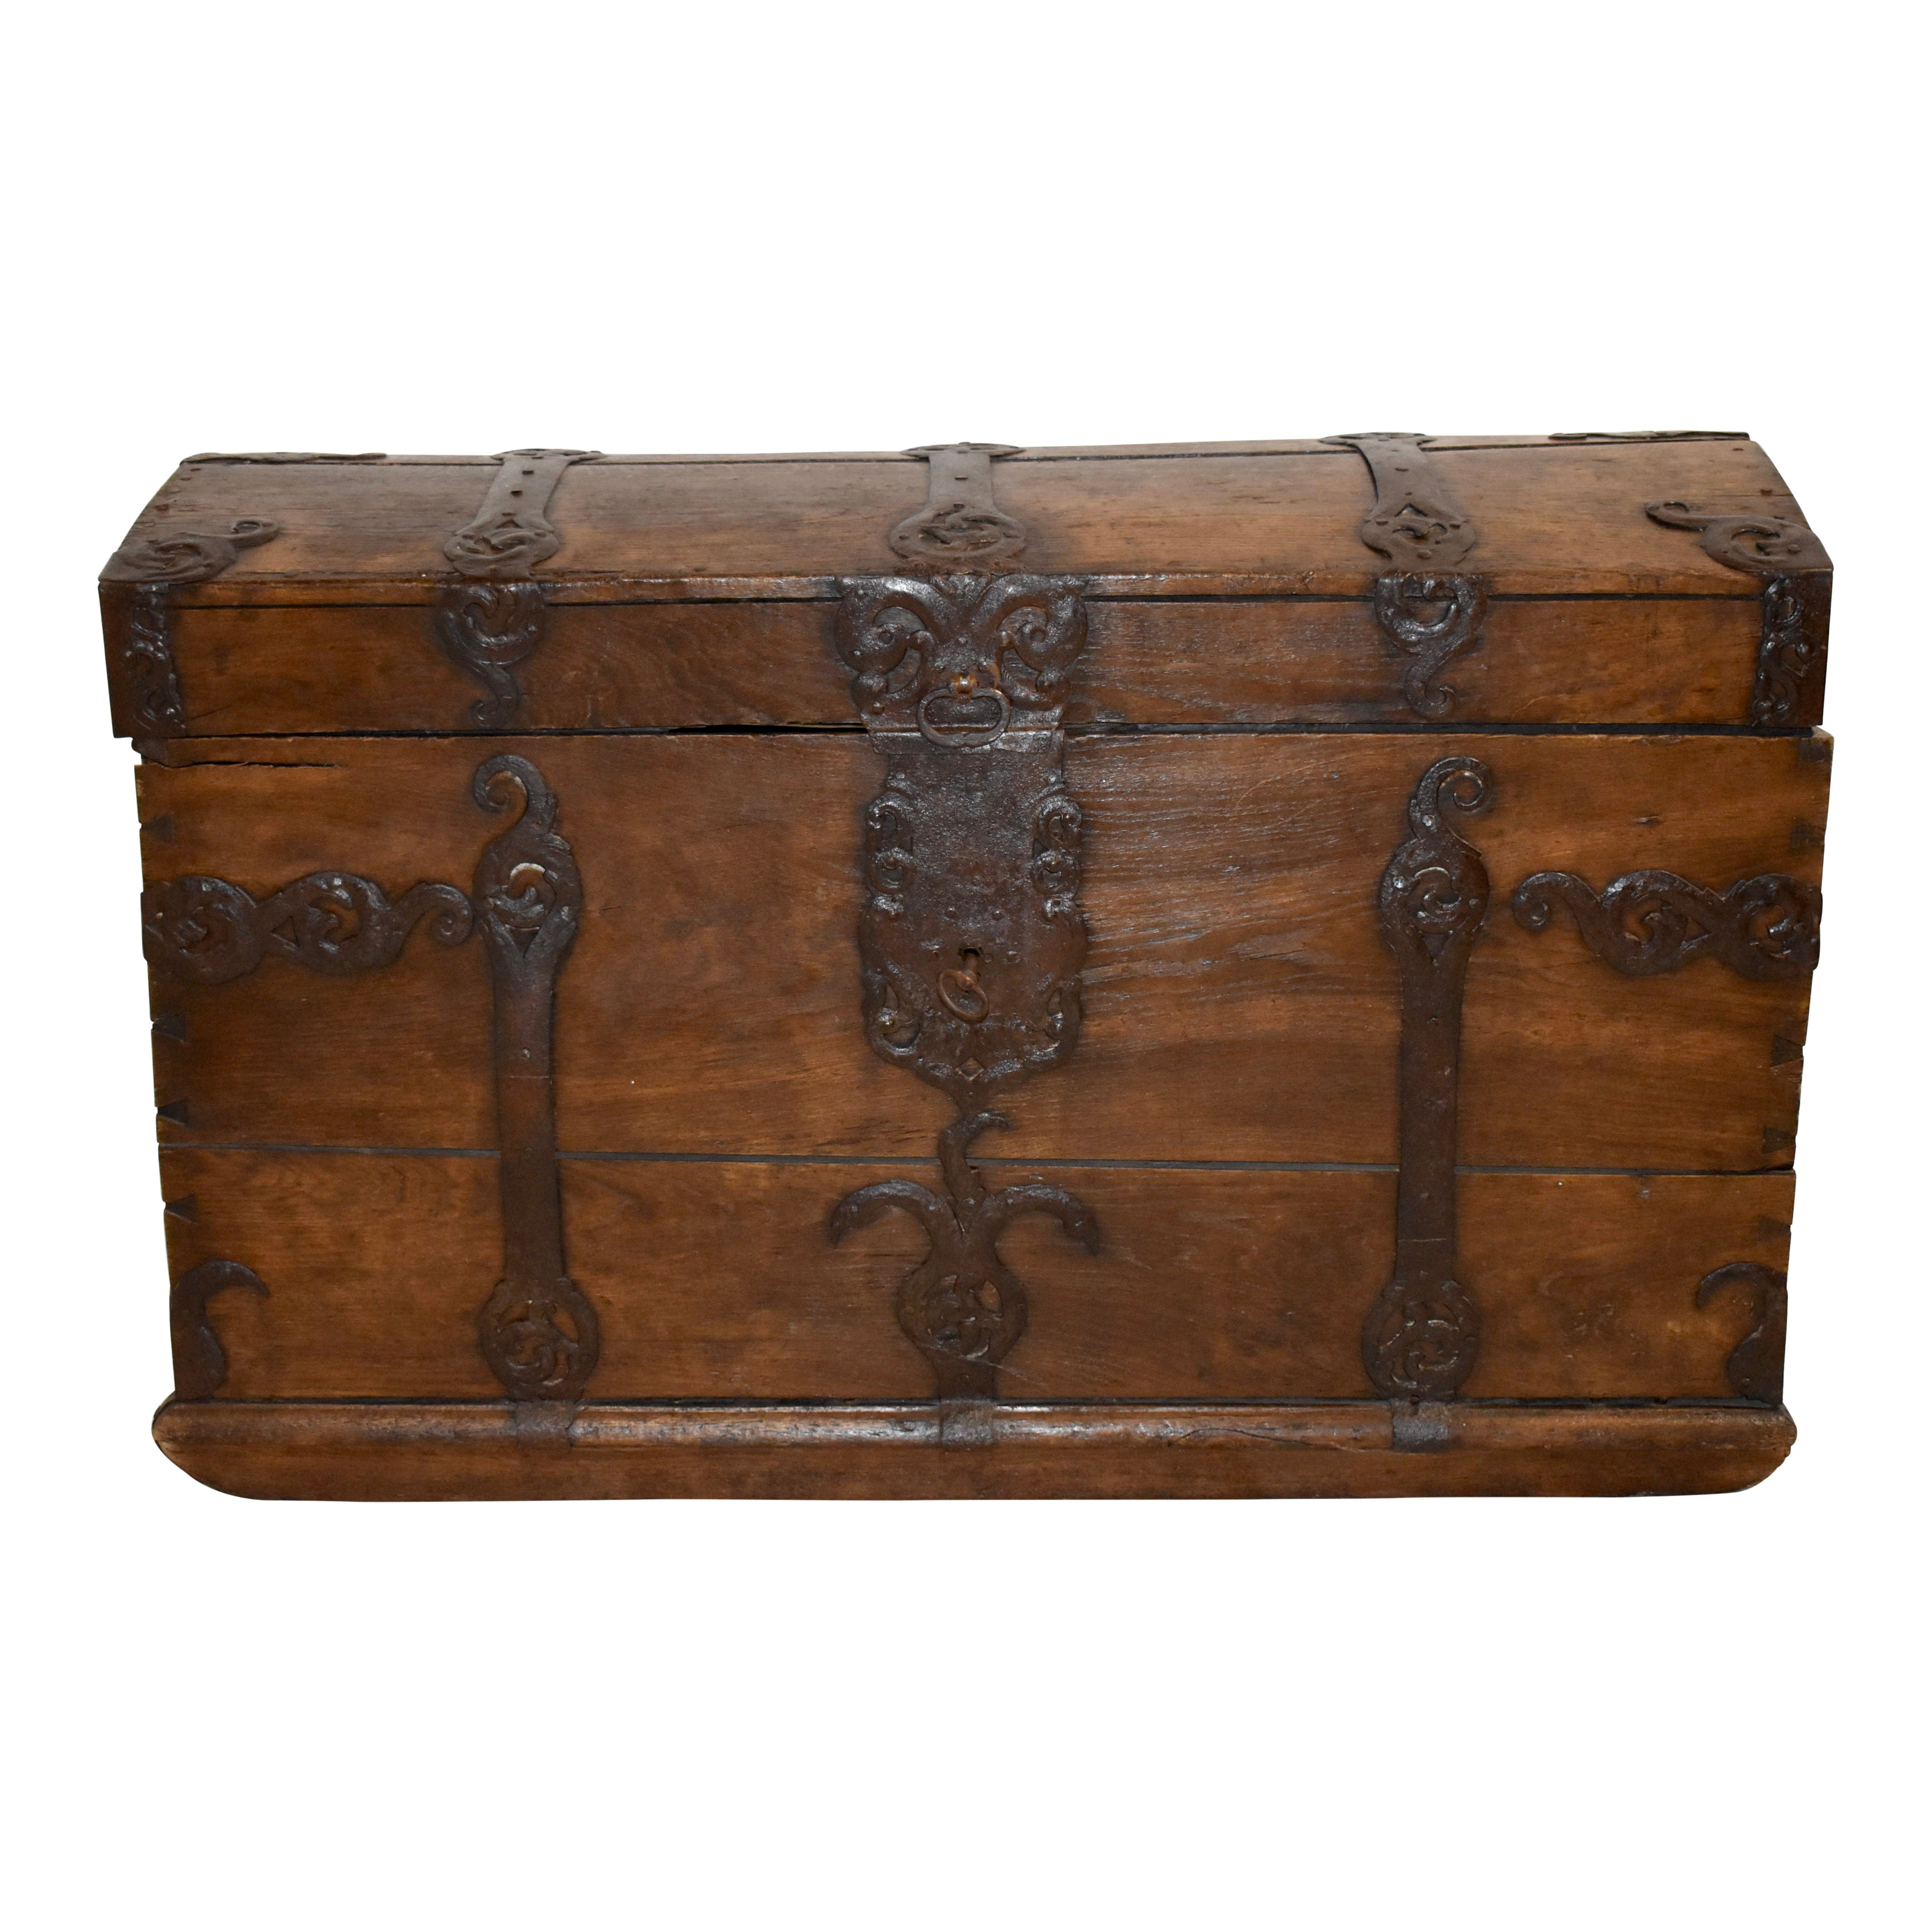 Sea Chest with Iron Accents